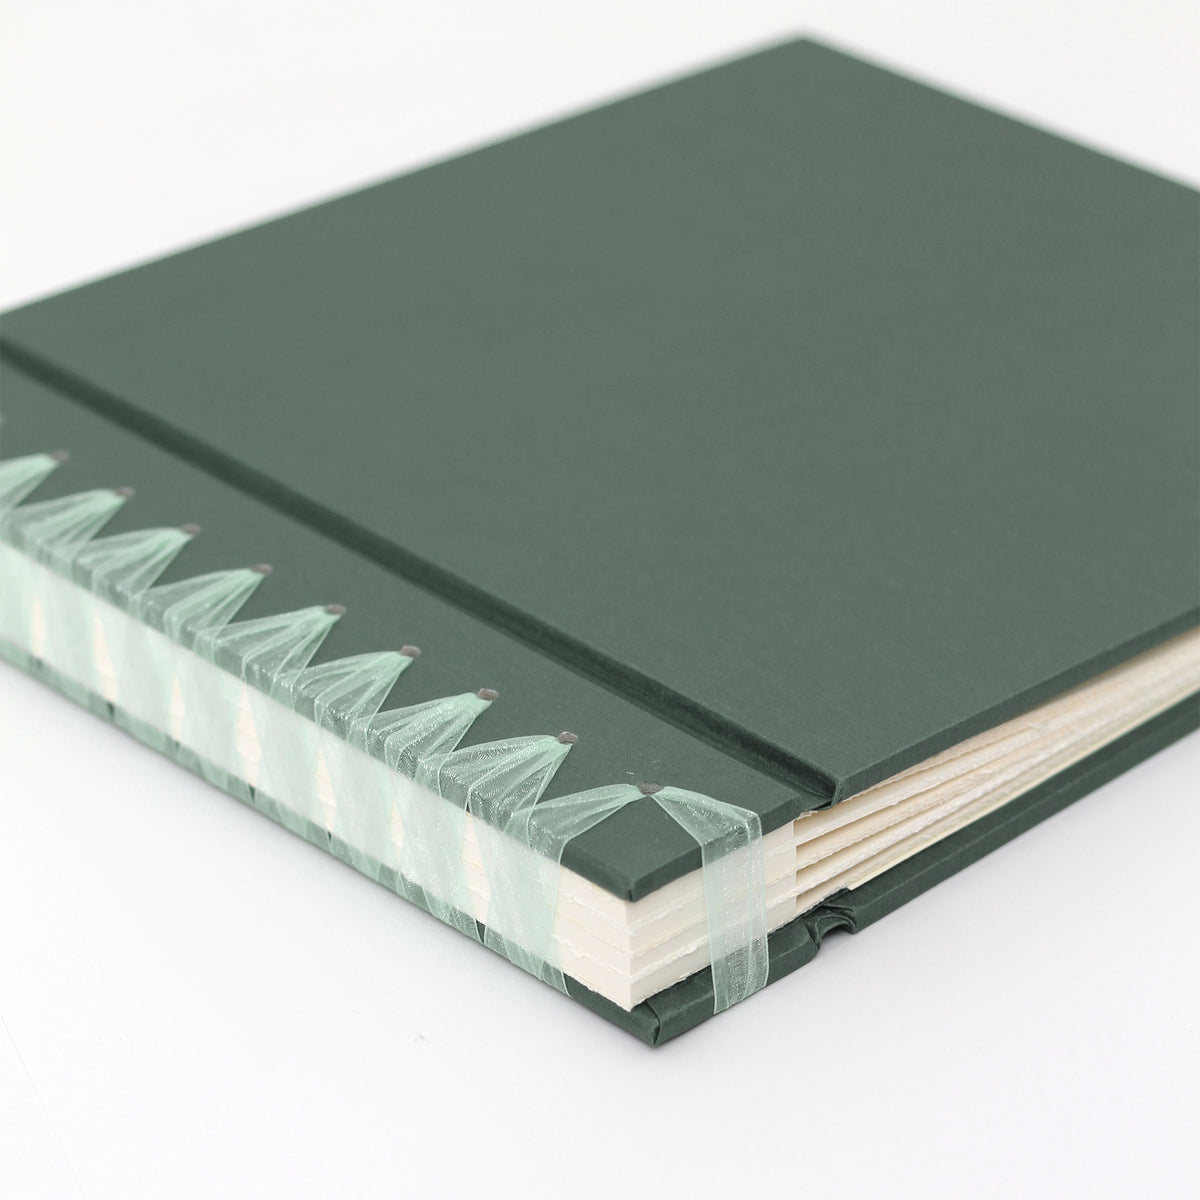 Large 10 x 15 Paper Page Album | Cover: Jade Silk | Available Personalized